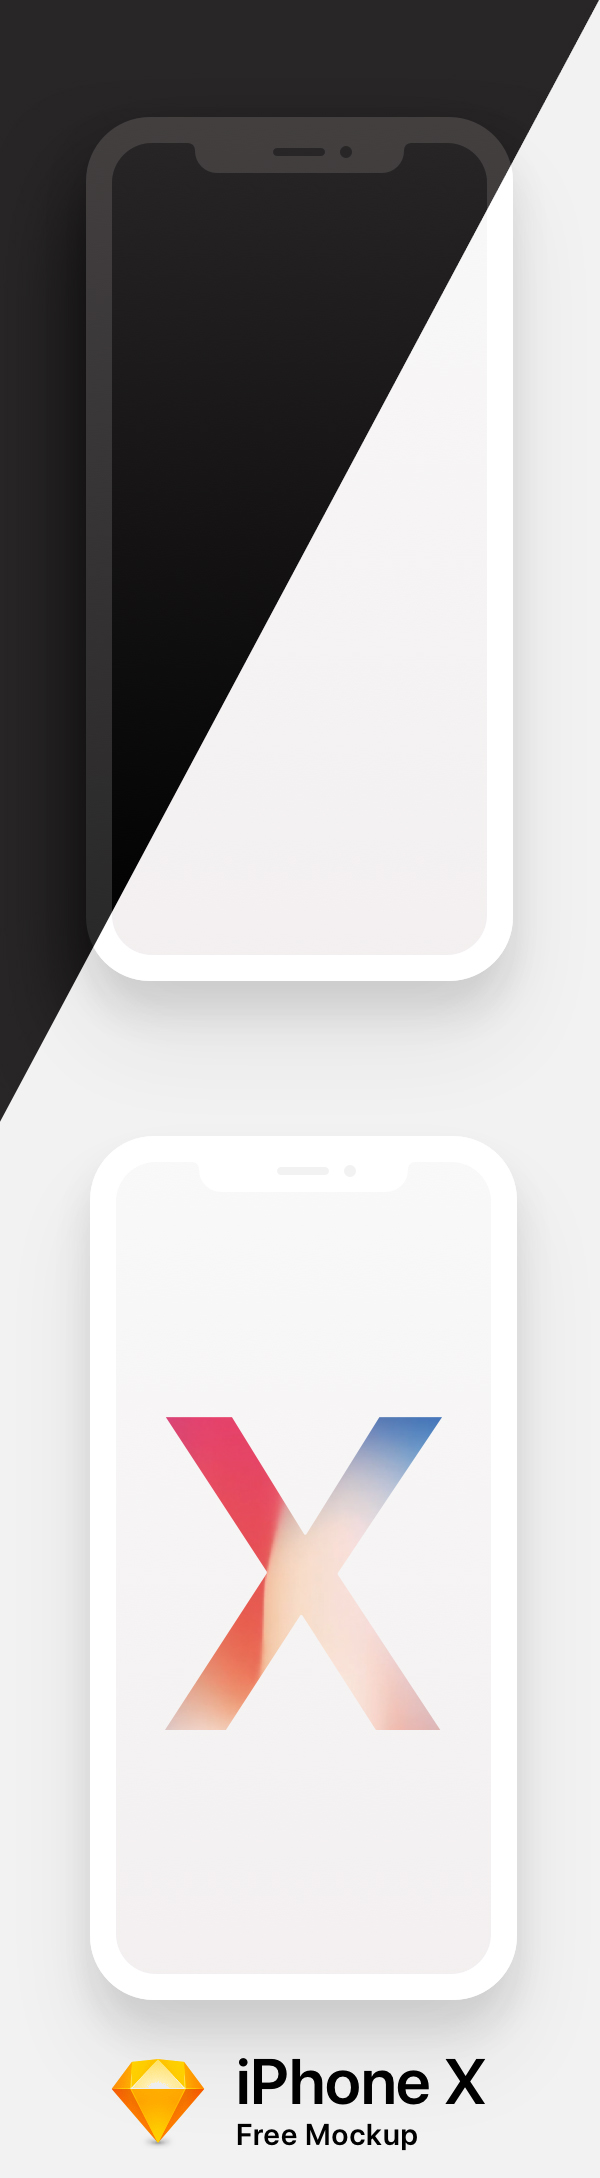 Free Download iPhone X PSD Mockups and Sketch - 28